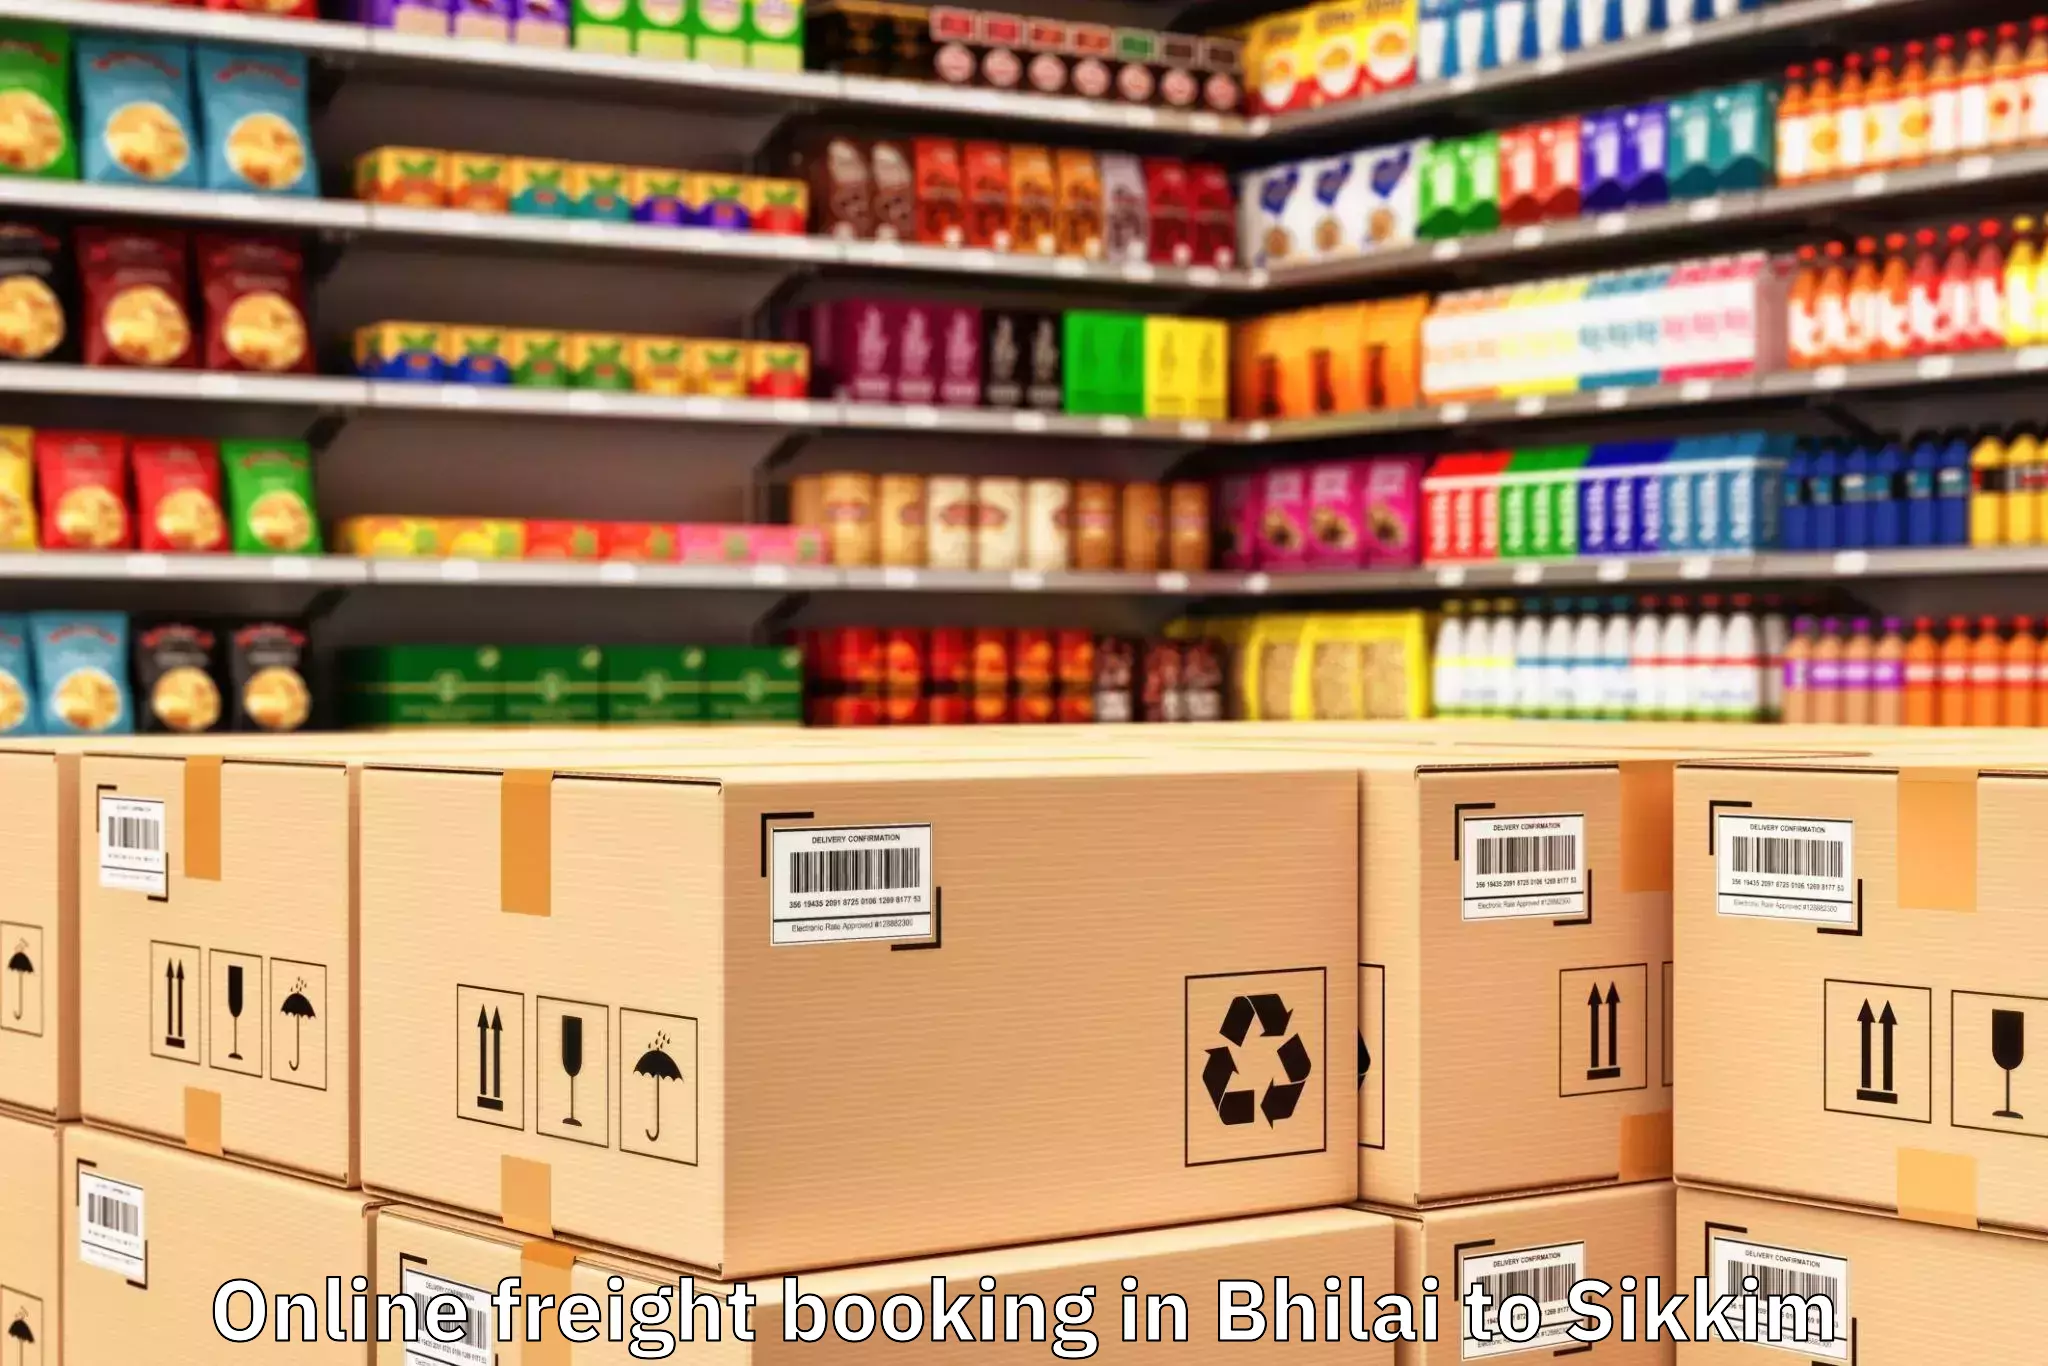 Leading Bhilai to Sikkim Online Freight Booking Provider